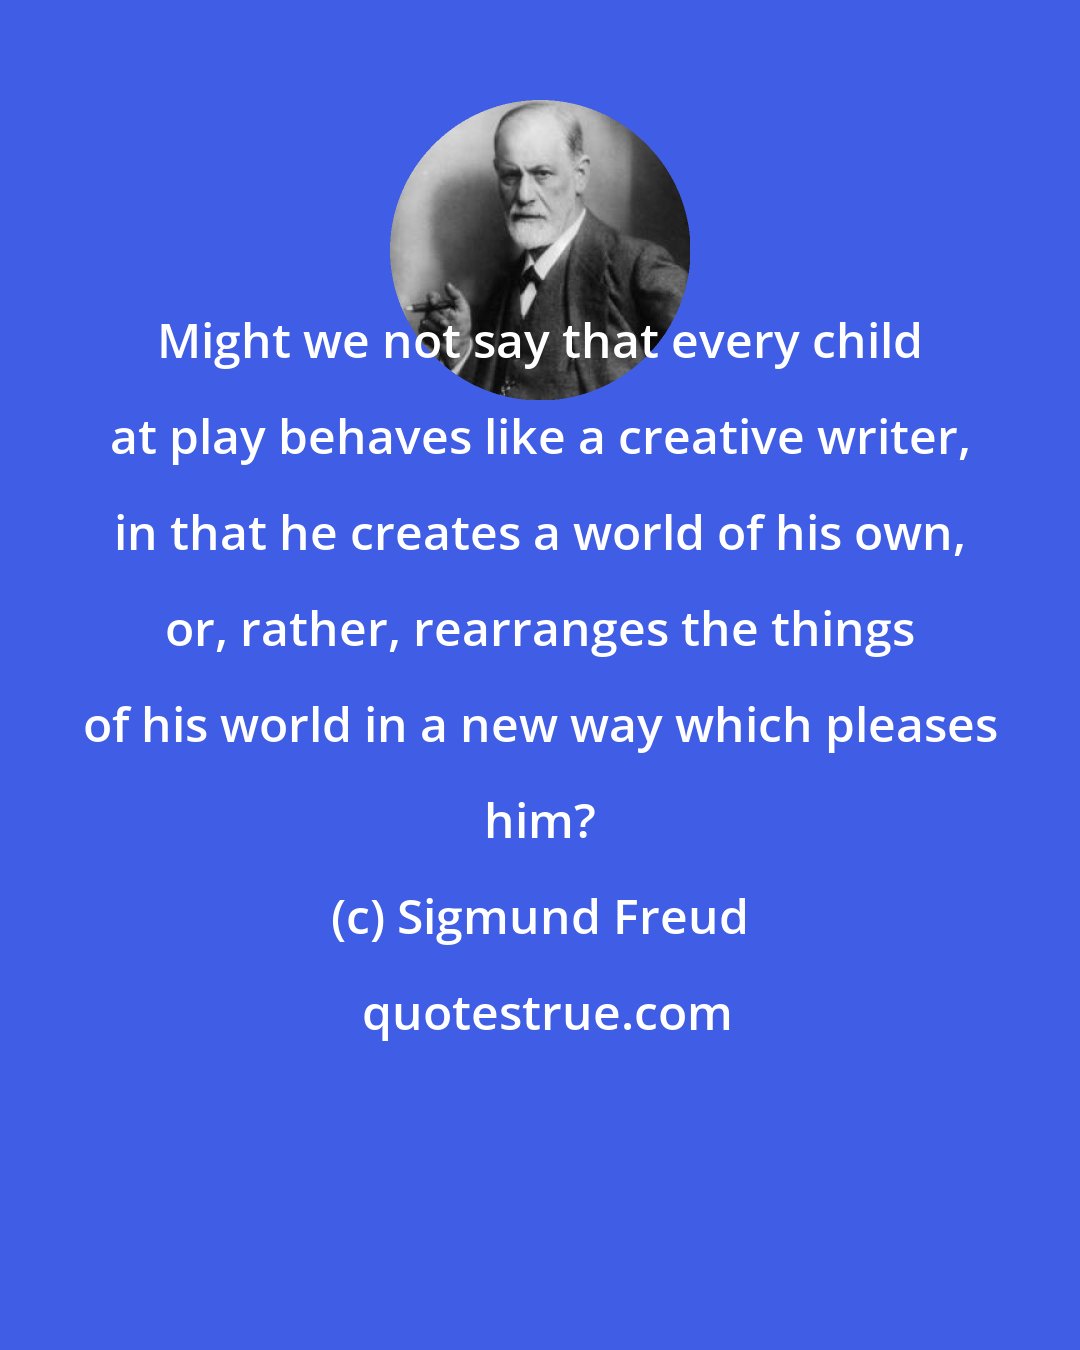 Sigmund Freud: Might we not say that every child at play behaves like a creative writer, in that he creates a world of his own, or, rather, rearranges the things of his world in a new way which pleases him?